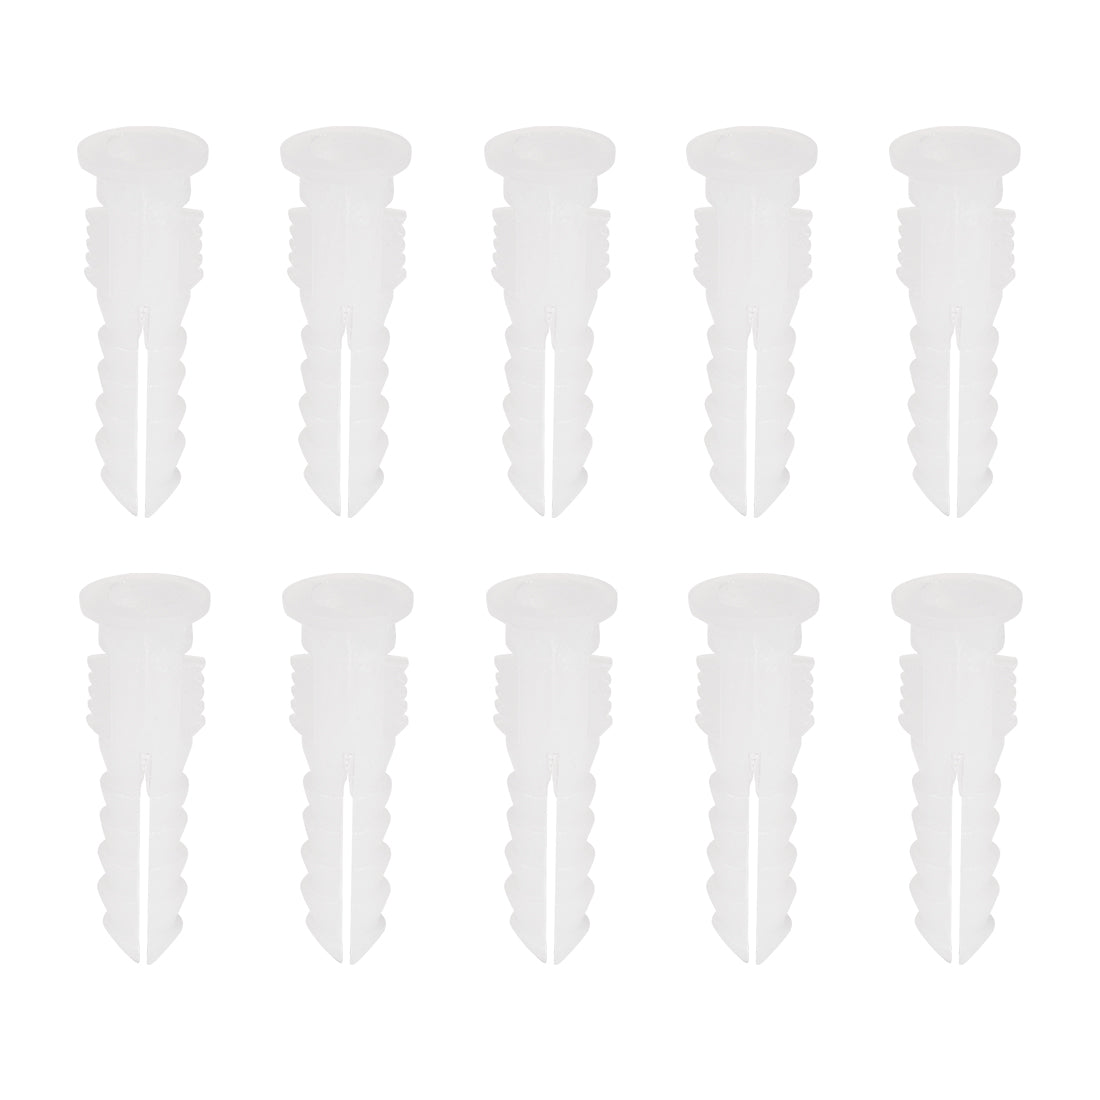 uxcell Uxcell 6x30mm Plastic Expansion Tube Bolts Column Frame Fixings White 75pcs